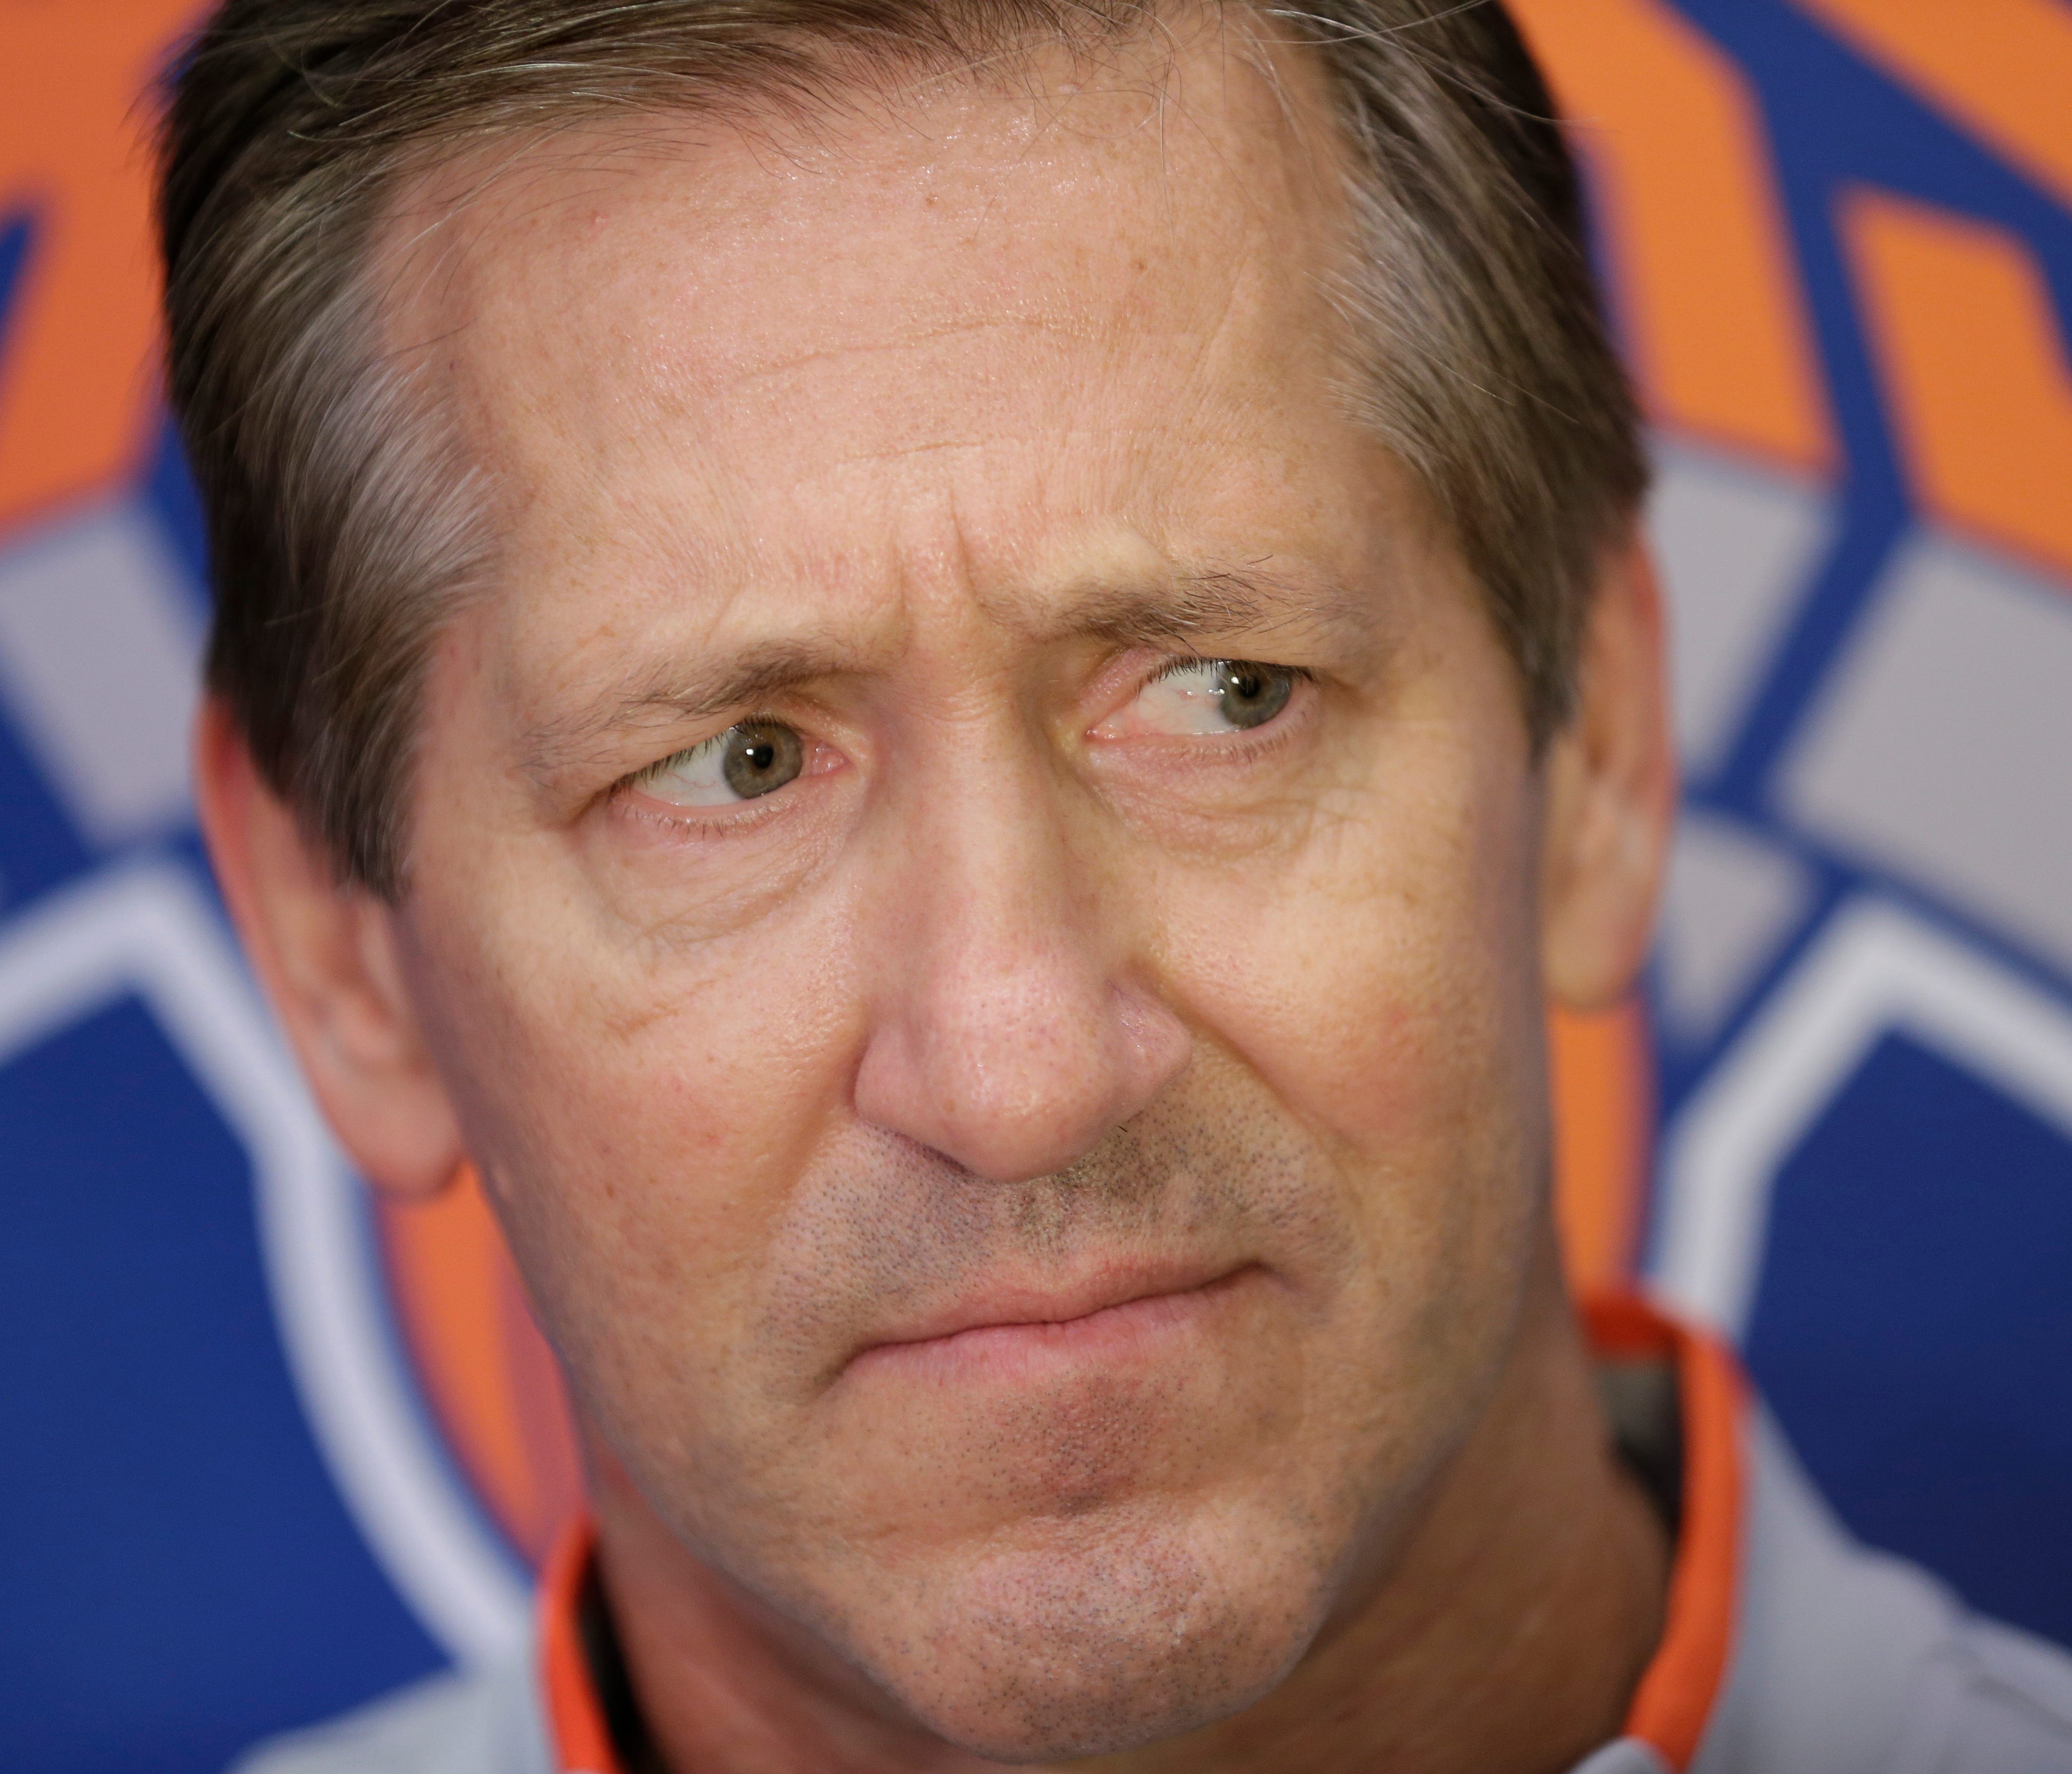 New York Knicks head coach Jeff Hornacek talks to reporters after a practice in Greenburgh, N.Y., Tuesday, Sept. 26, 2017. (AP Photo/Seth Wenig) ORG XMIT: NYSW111